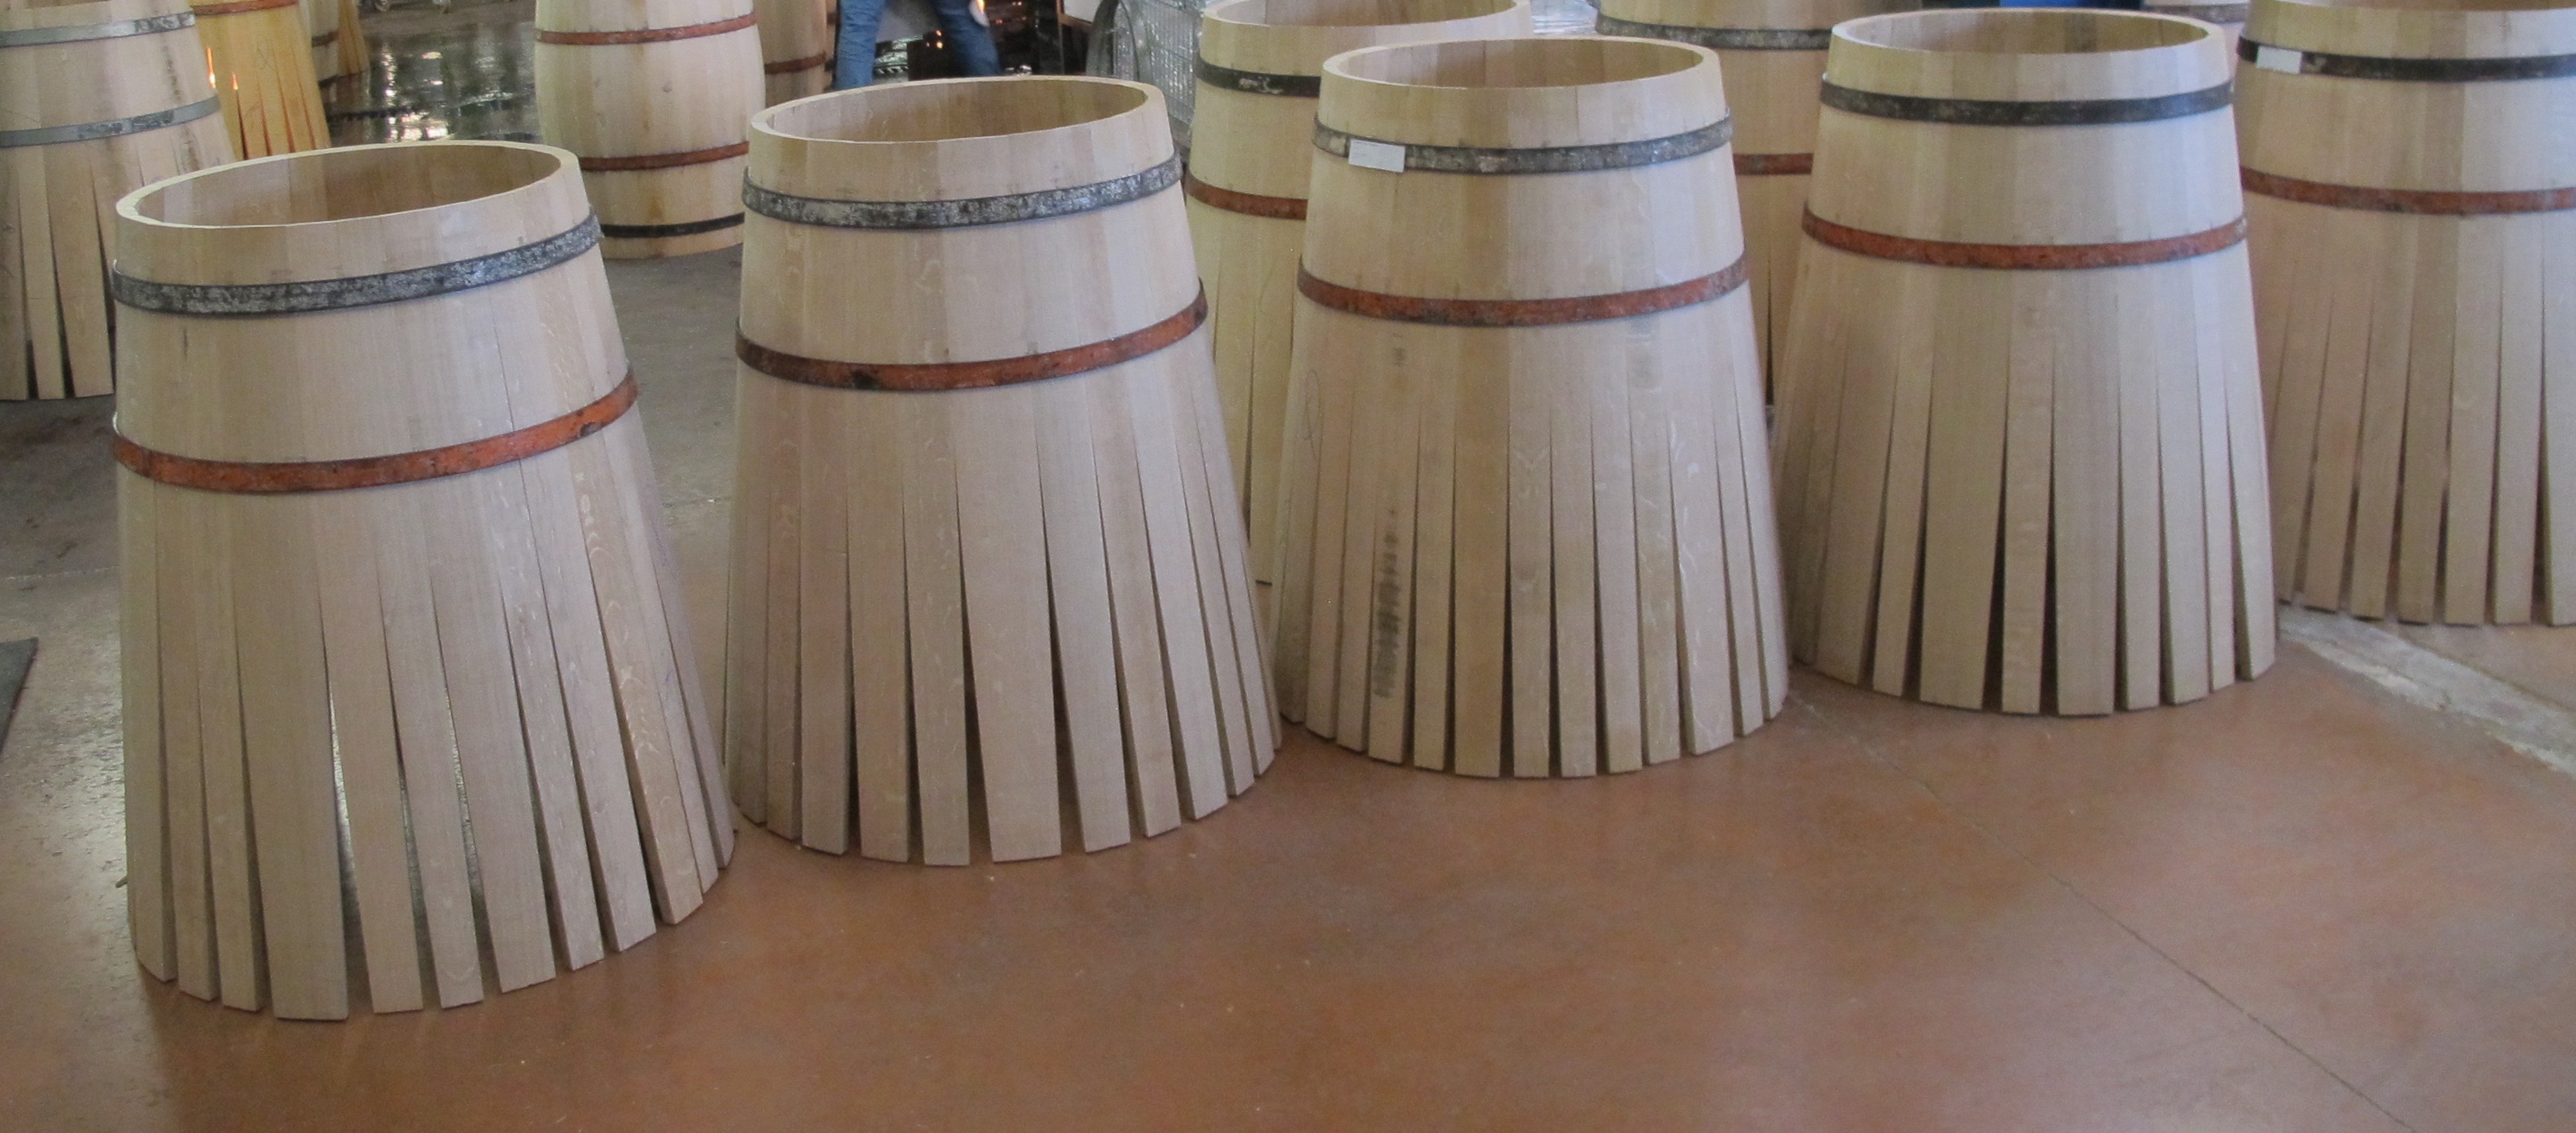 Barrel making is an essential part of wine and an incredibly time-comsuming process. Photo by Marla Norman